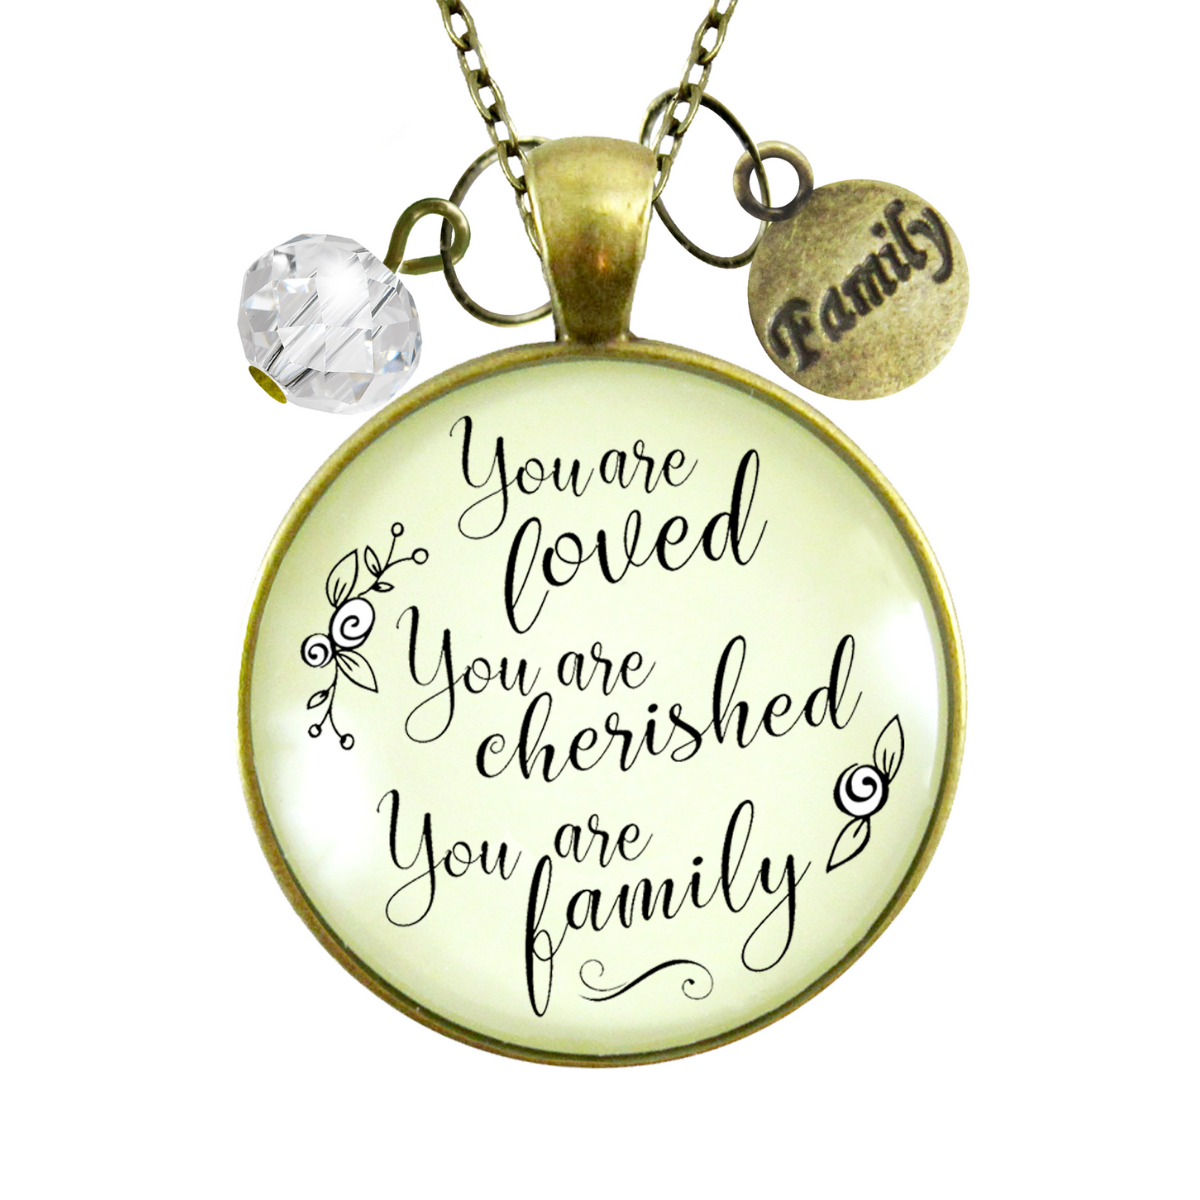 Loving Family Necklace You are Cherished Meaningful Gift Jewelry  Necklace - Gutsy Goodness Handmade Jewelry